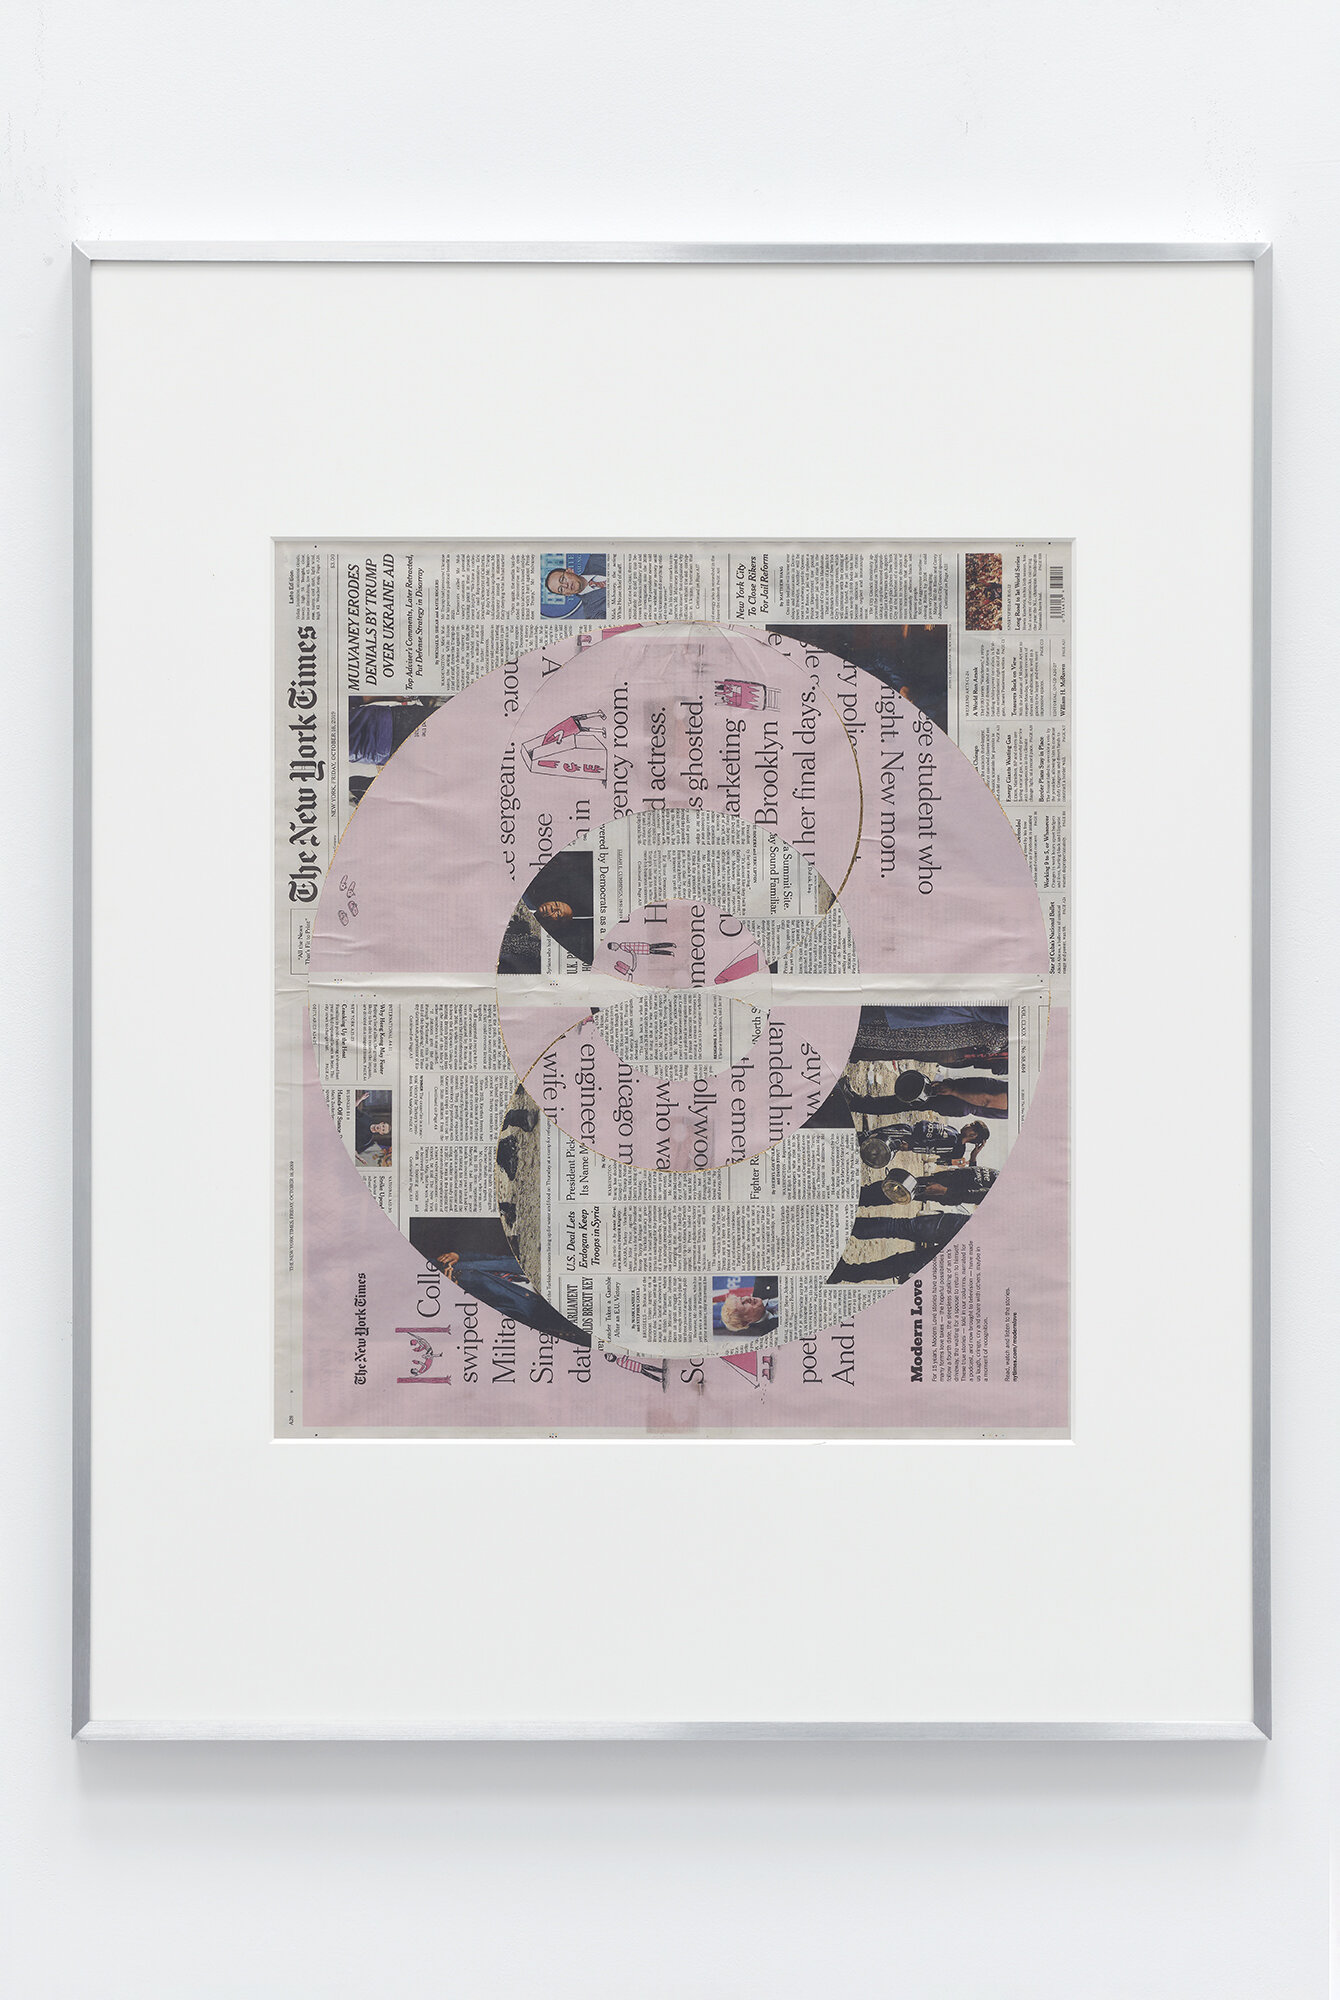   Blind Collage (Three 180º Rotations, The New York Times, Friday, October 18, 2019)    2019   Newspaper, tape, and 22 karat gold leaf  39 1/8 x 31 1/4 inches   Blind Collages, 2017–  